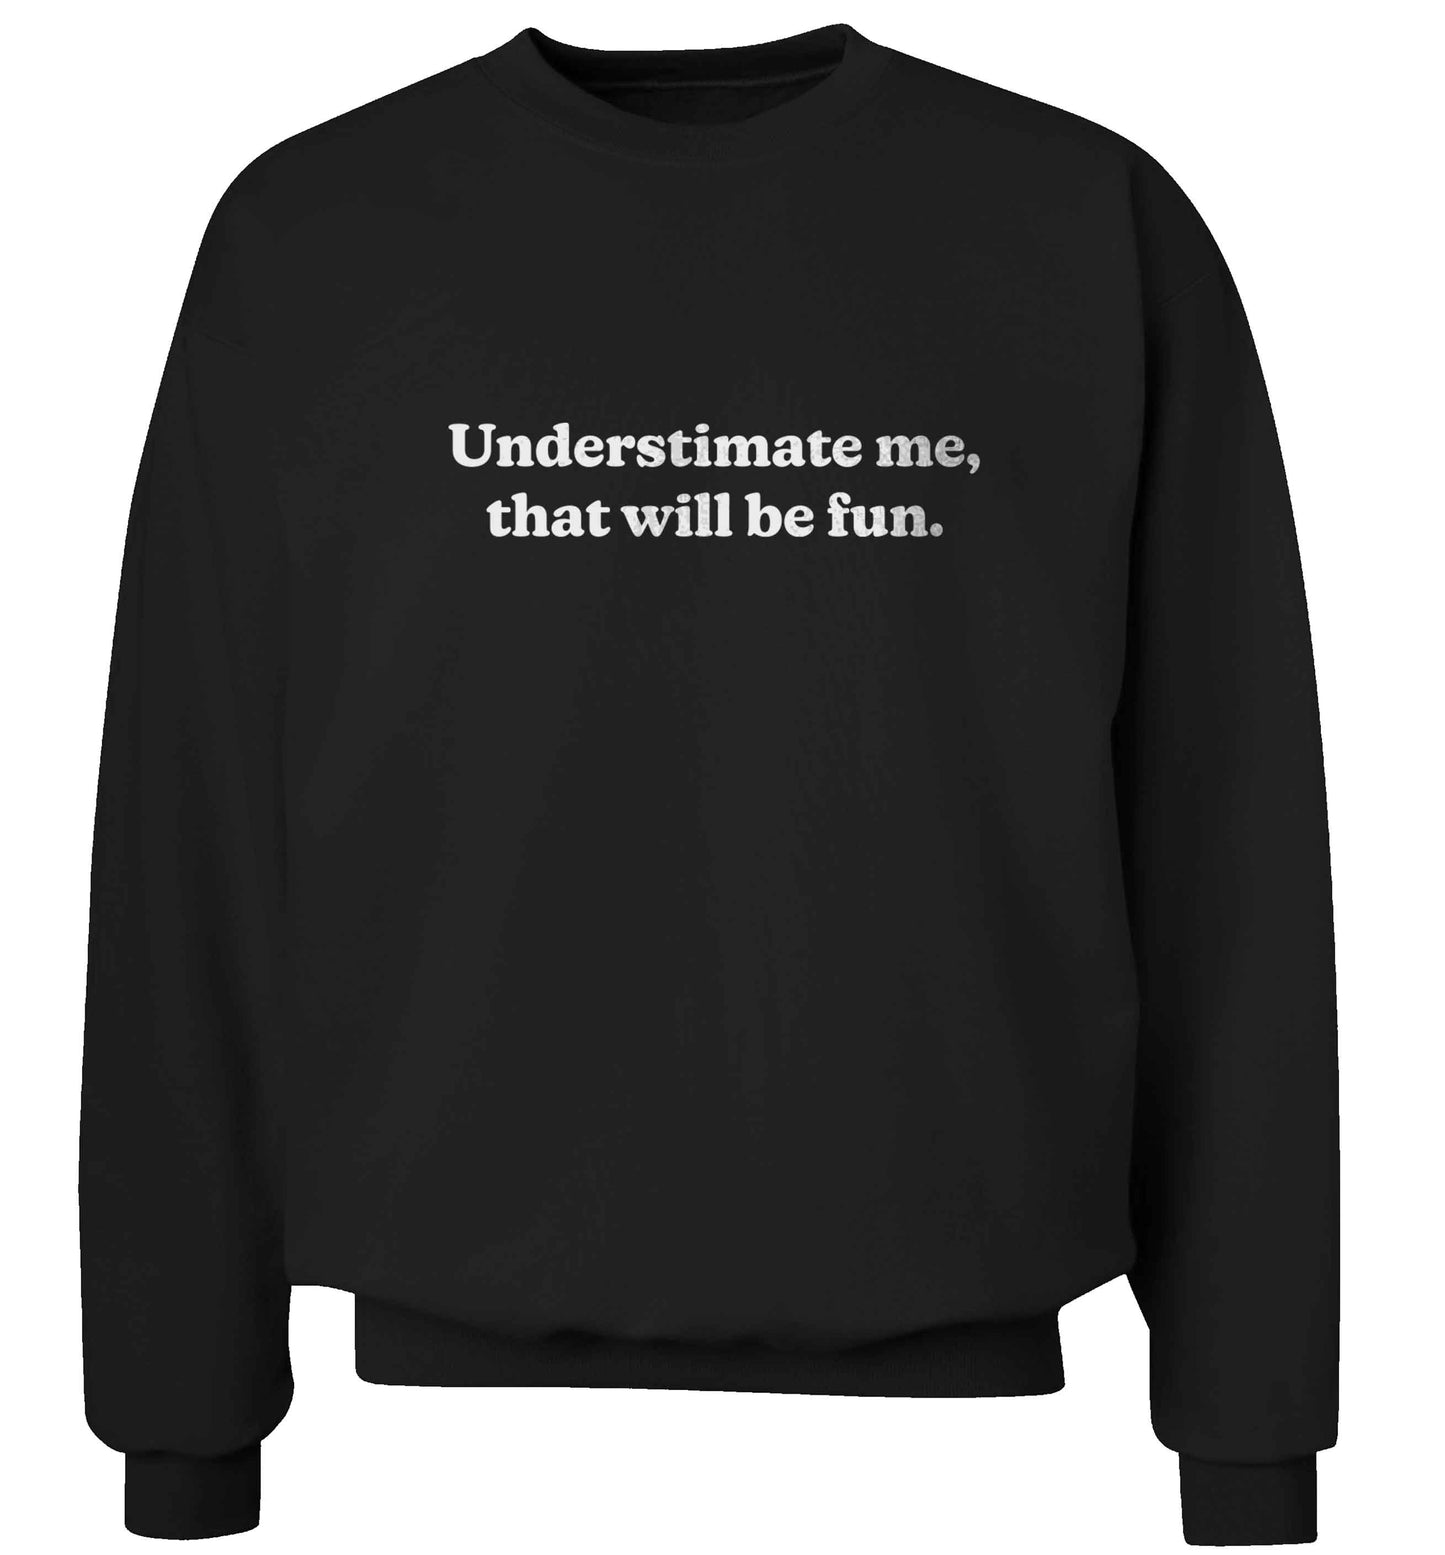 Underestimate me that will be fun adult's unisex black sweater 2XL